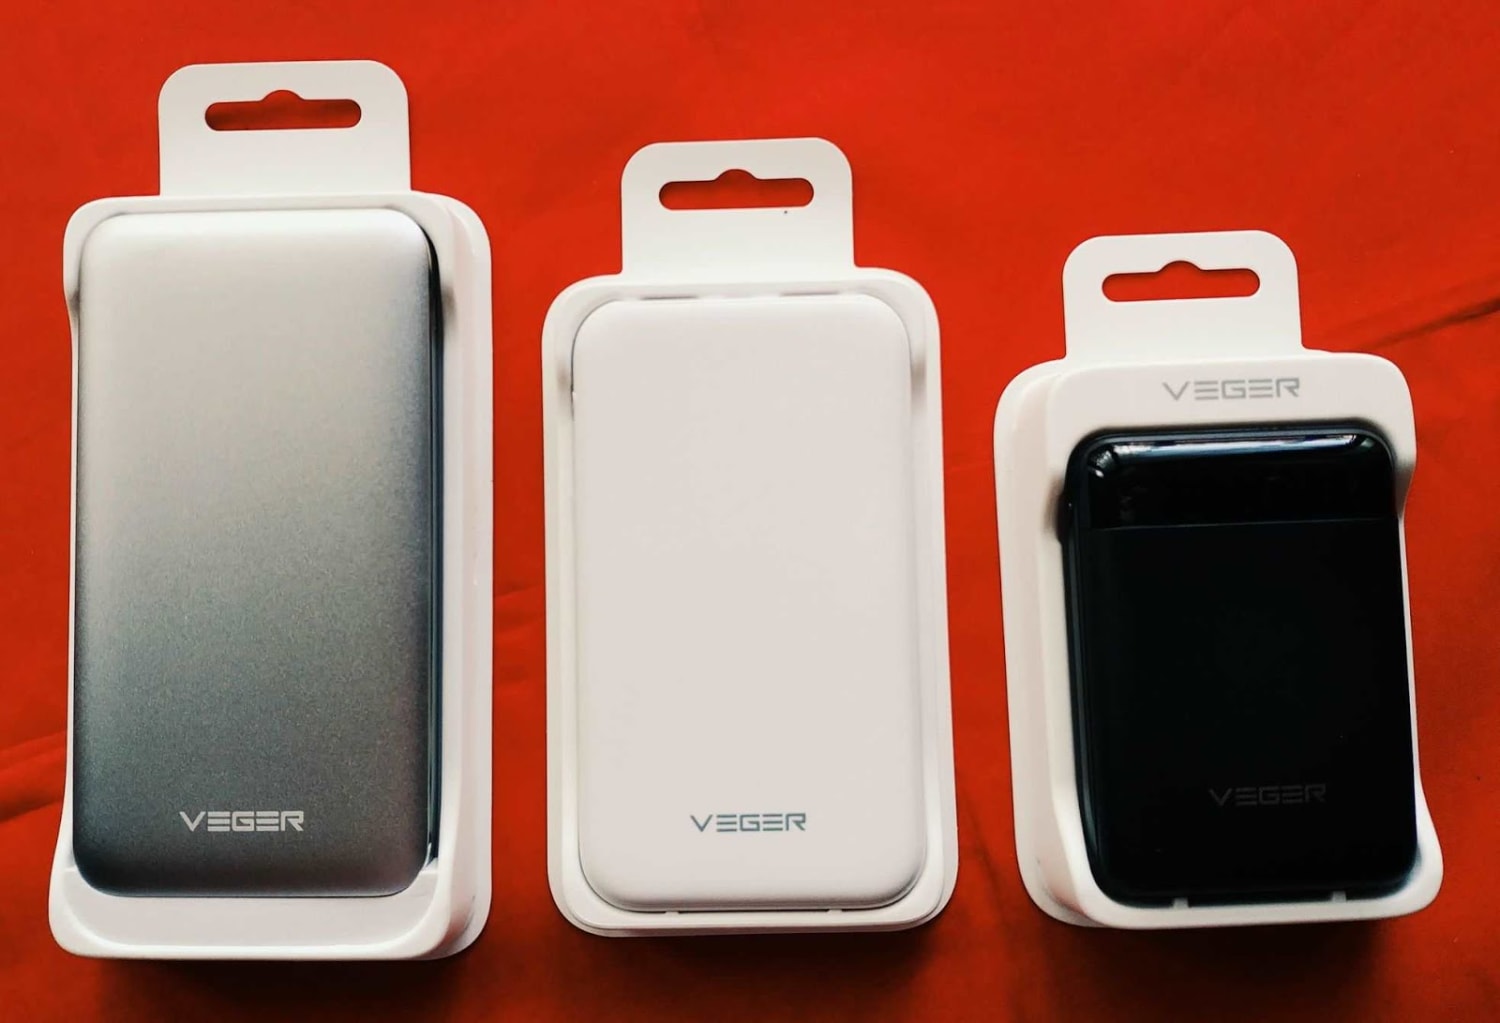 Veger Power Banks: my reliable partner for powering up my travel gadgets